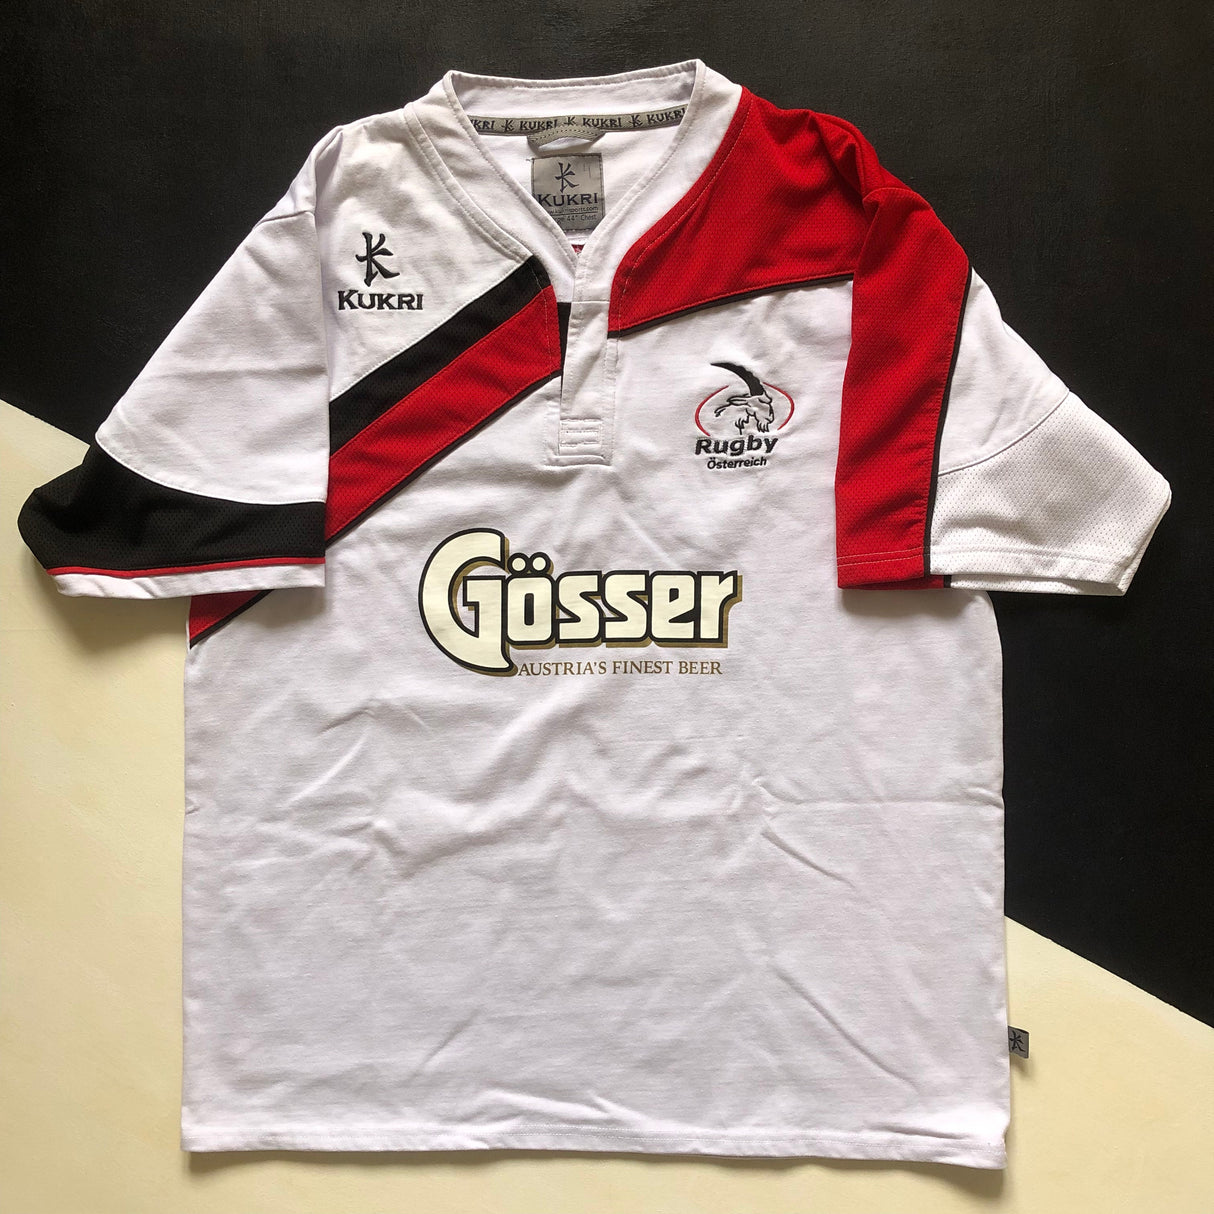 Austria National Rugby Team Jersey 2010/11 XL Underdog Rugby - The Tier 2 Rugby Shop 